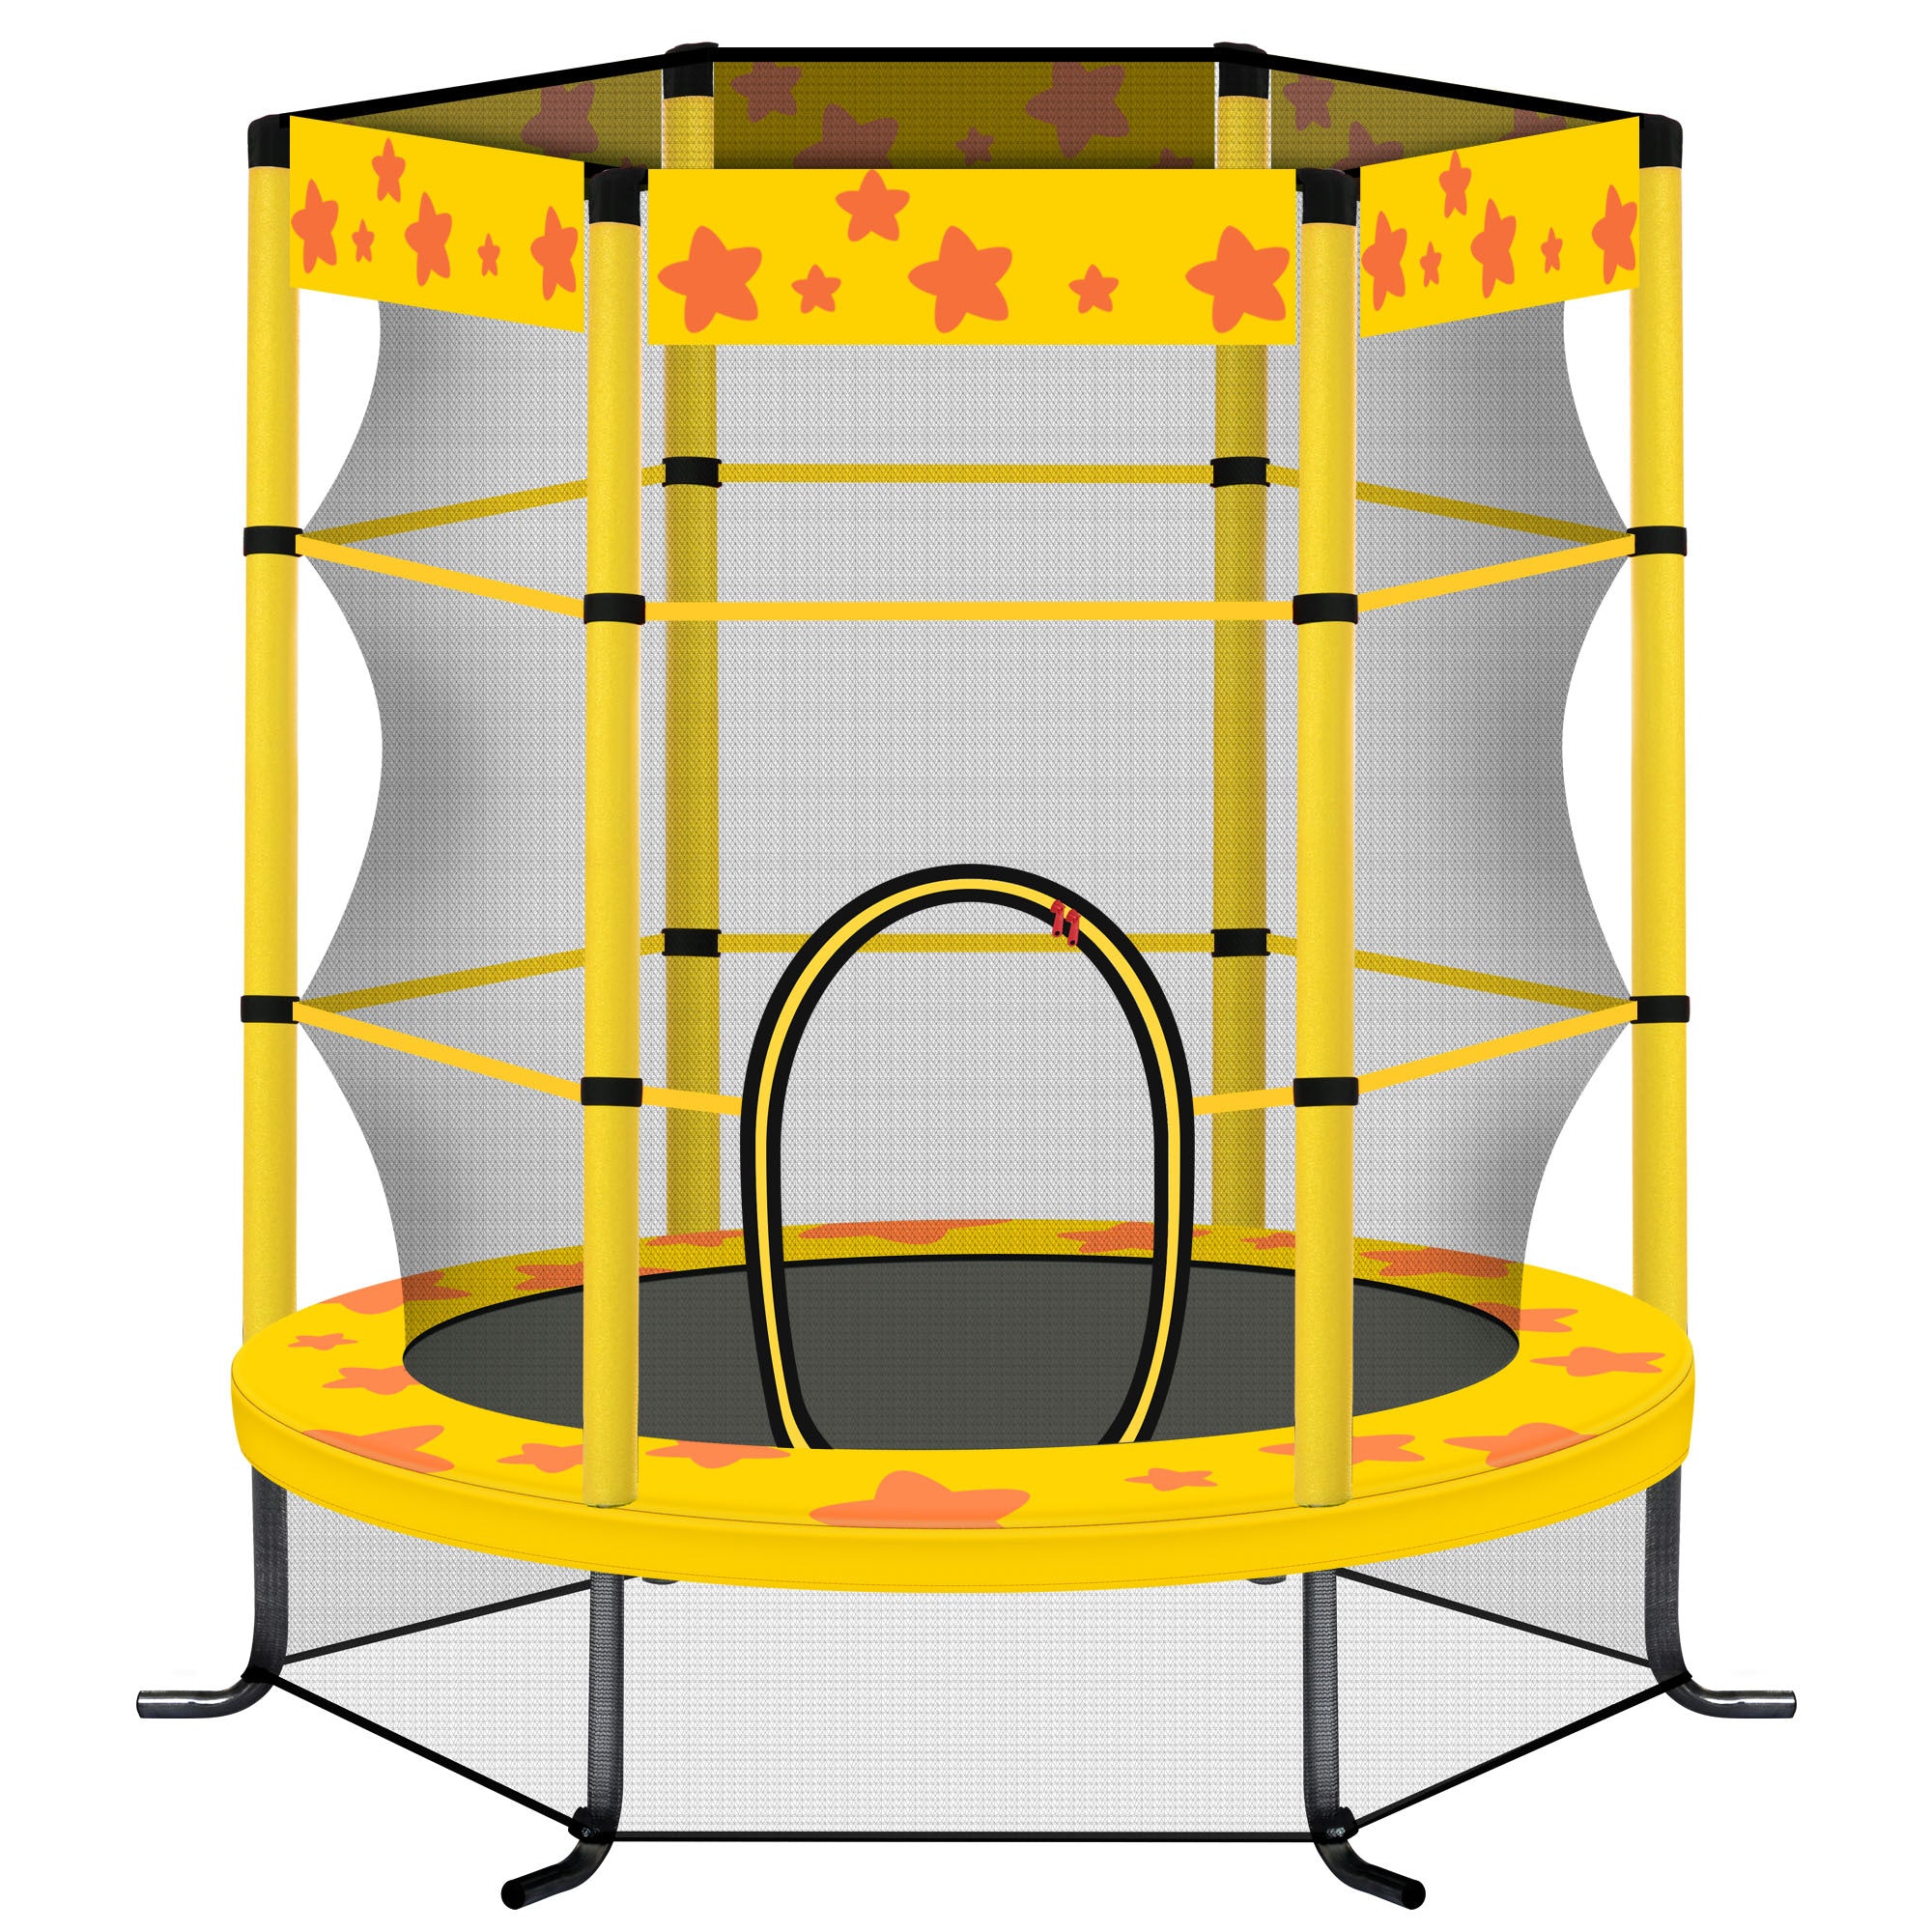 55 Inch Kids Trampoline with Safety Enclosure Net yellow-metal